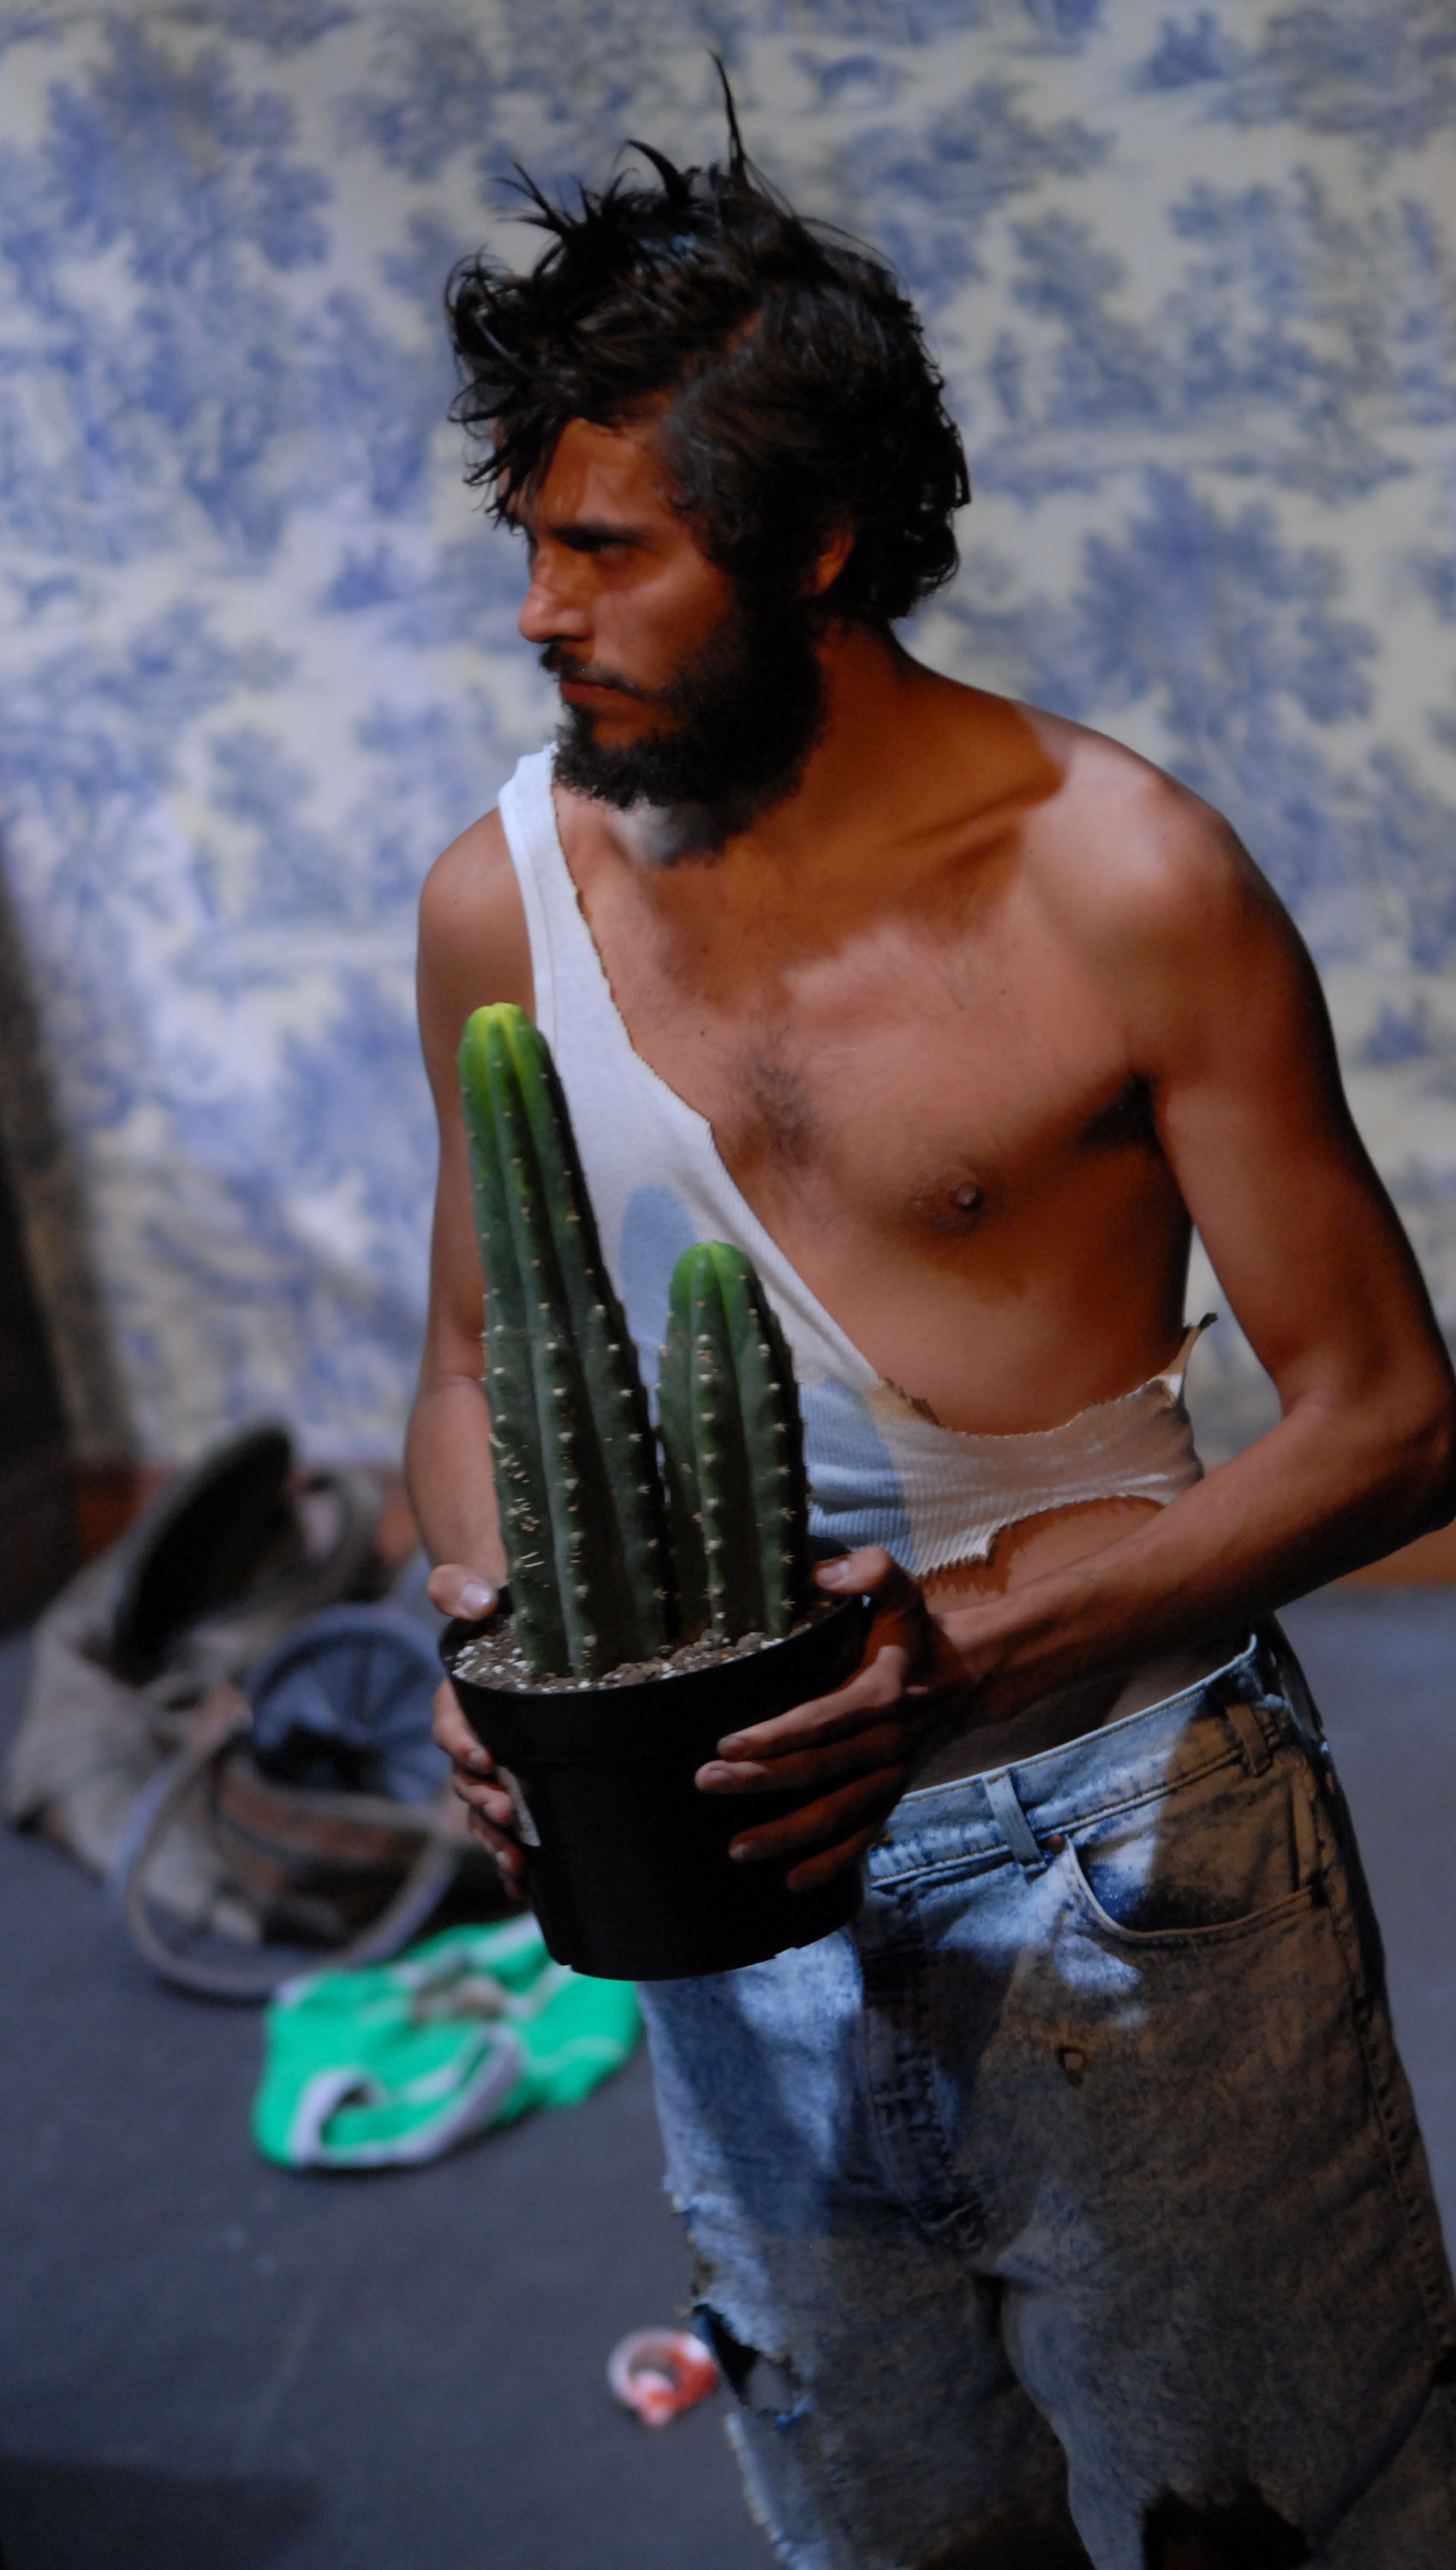 A man looks stage right while holding a cactus.